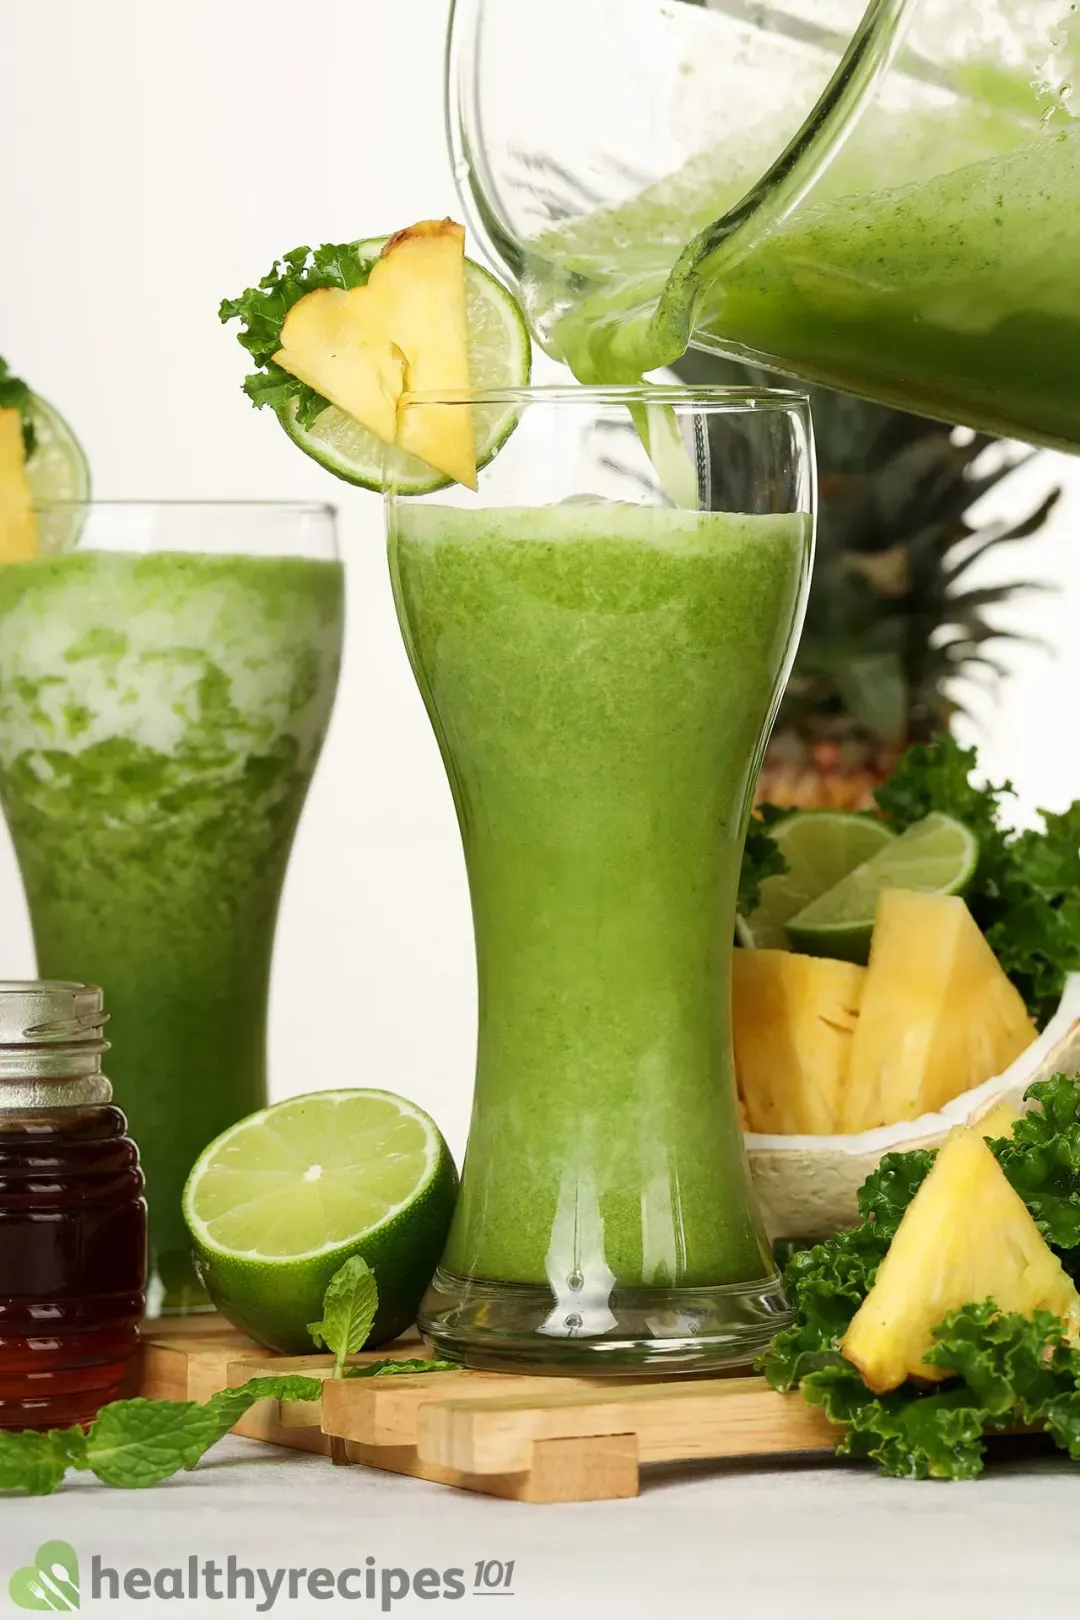 A pitcher of smoothie being poured into a glass decorated with a slice of pineapple alongside a glass of green mojito smoothie and ingredients of the smoothie.